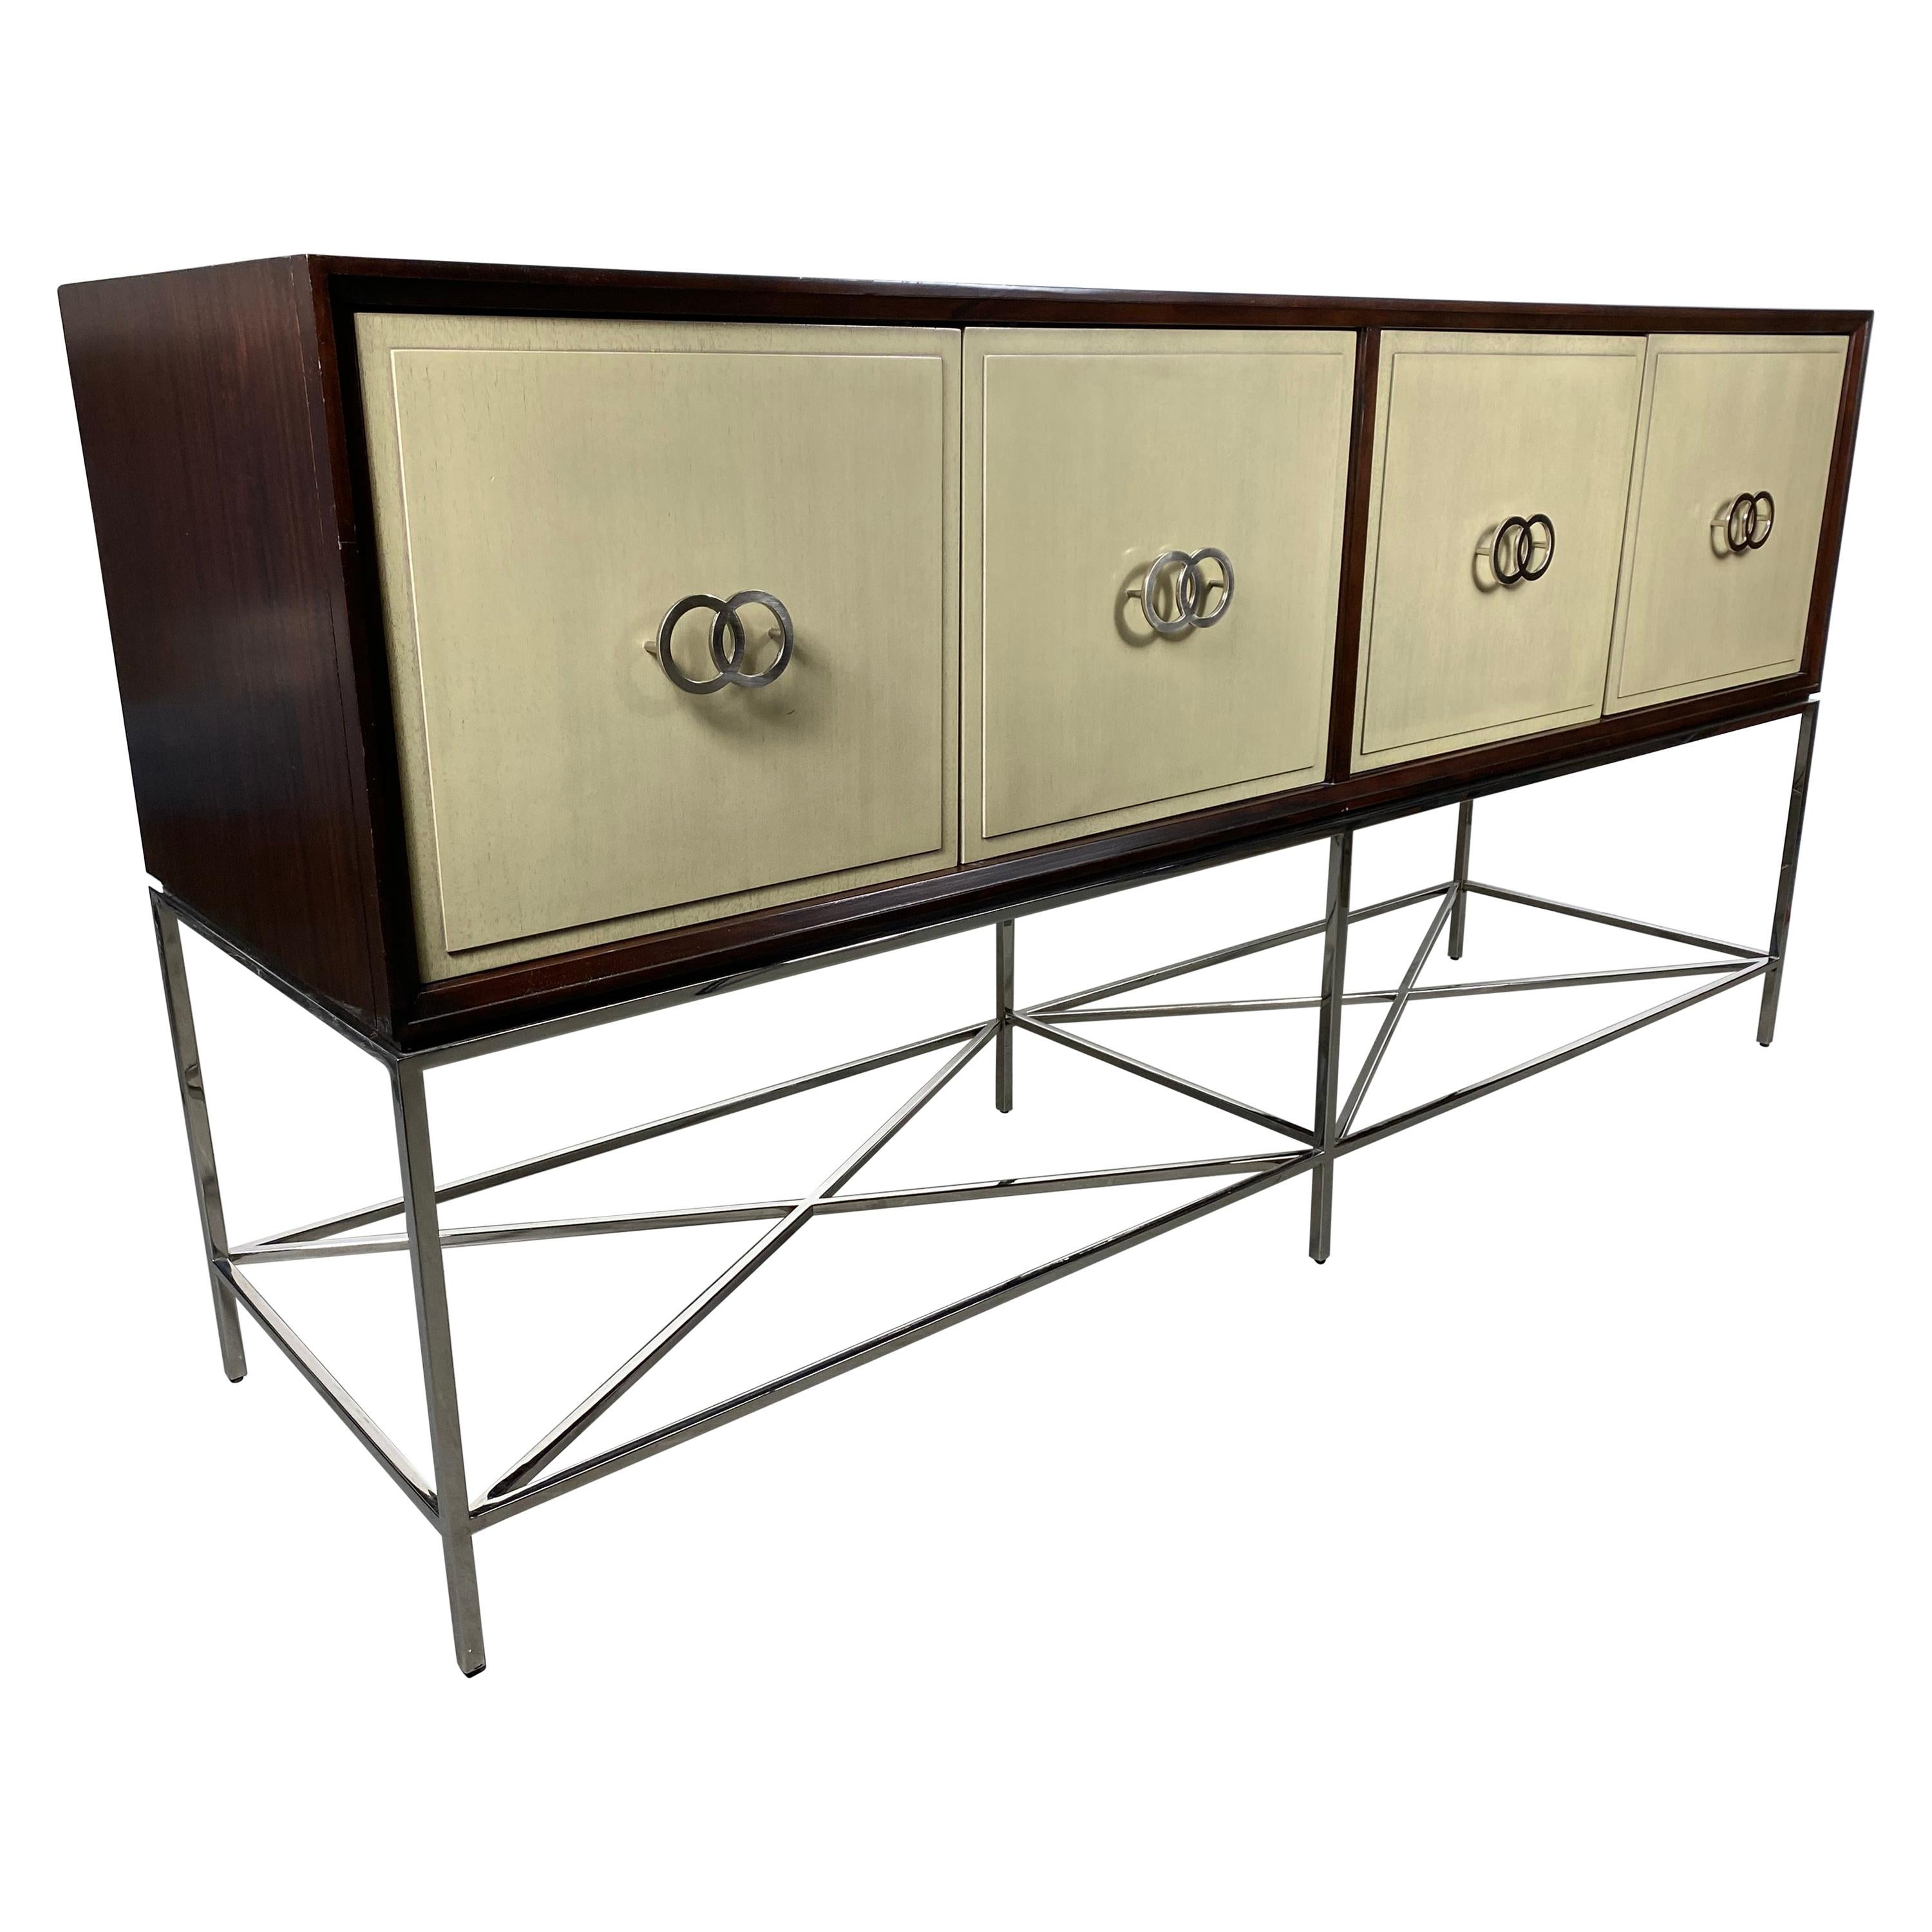 Vanguard Furniture, Michael Weiss, Kingsley Sideboard / Contemporary Modern For Sale